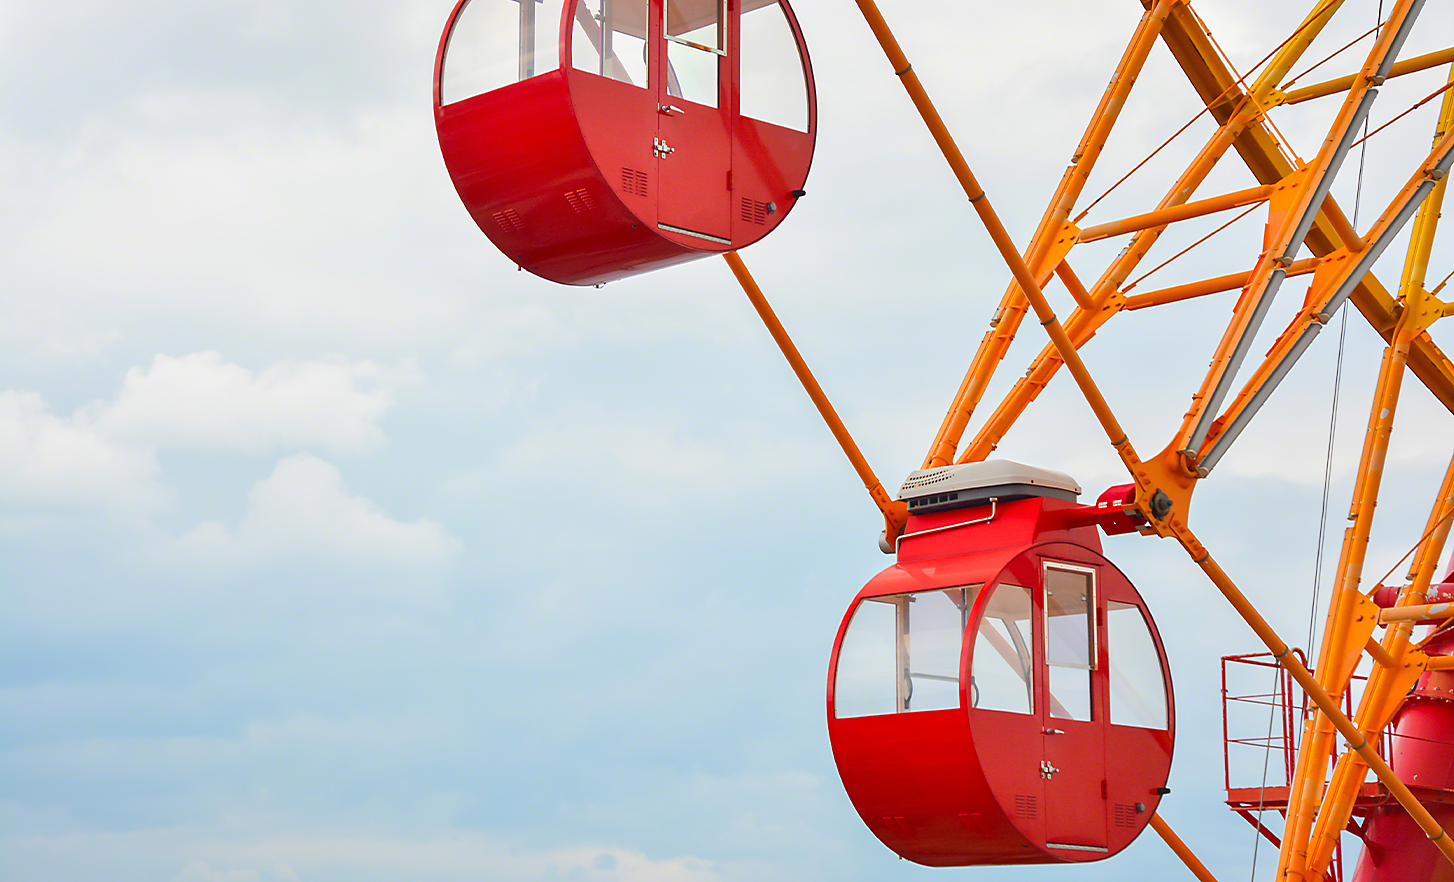 A bright orange and red big wheel against a cloudy sky